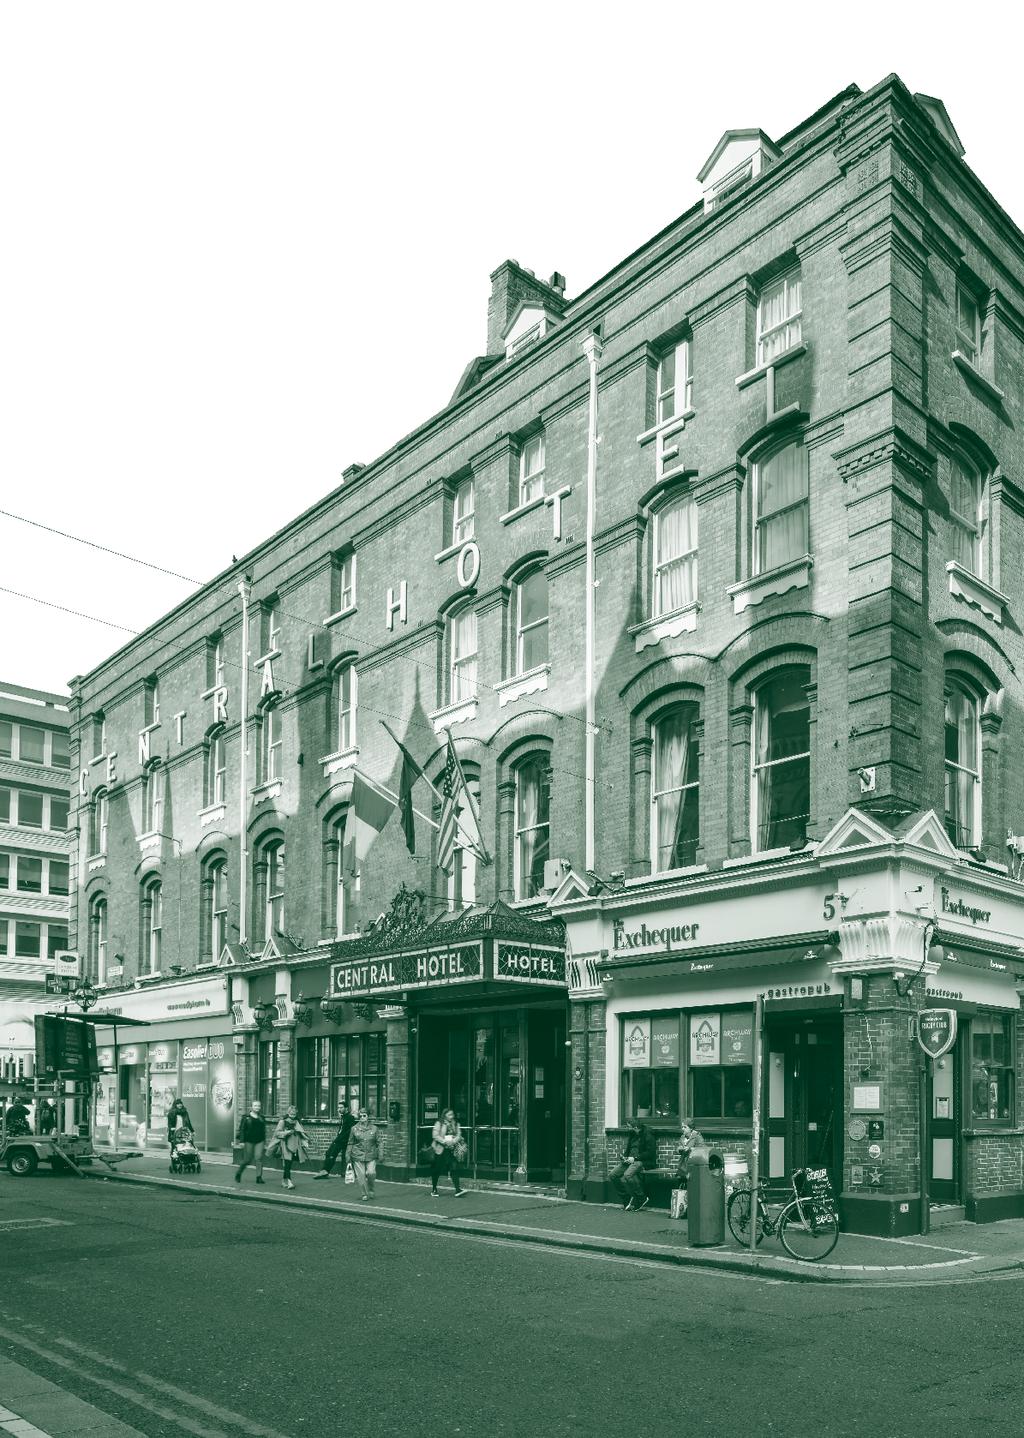 Exceptional opportunity to acquire a prime Dublin city centre